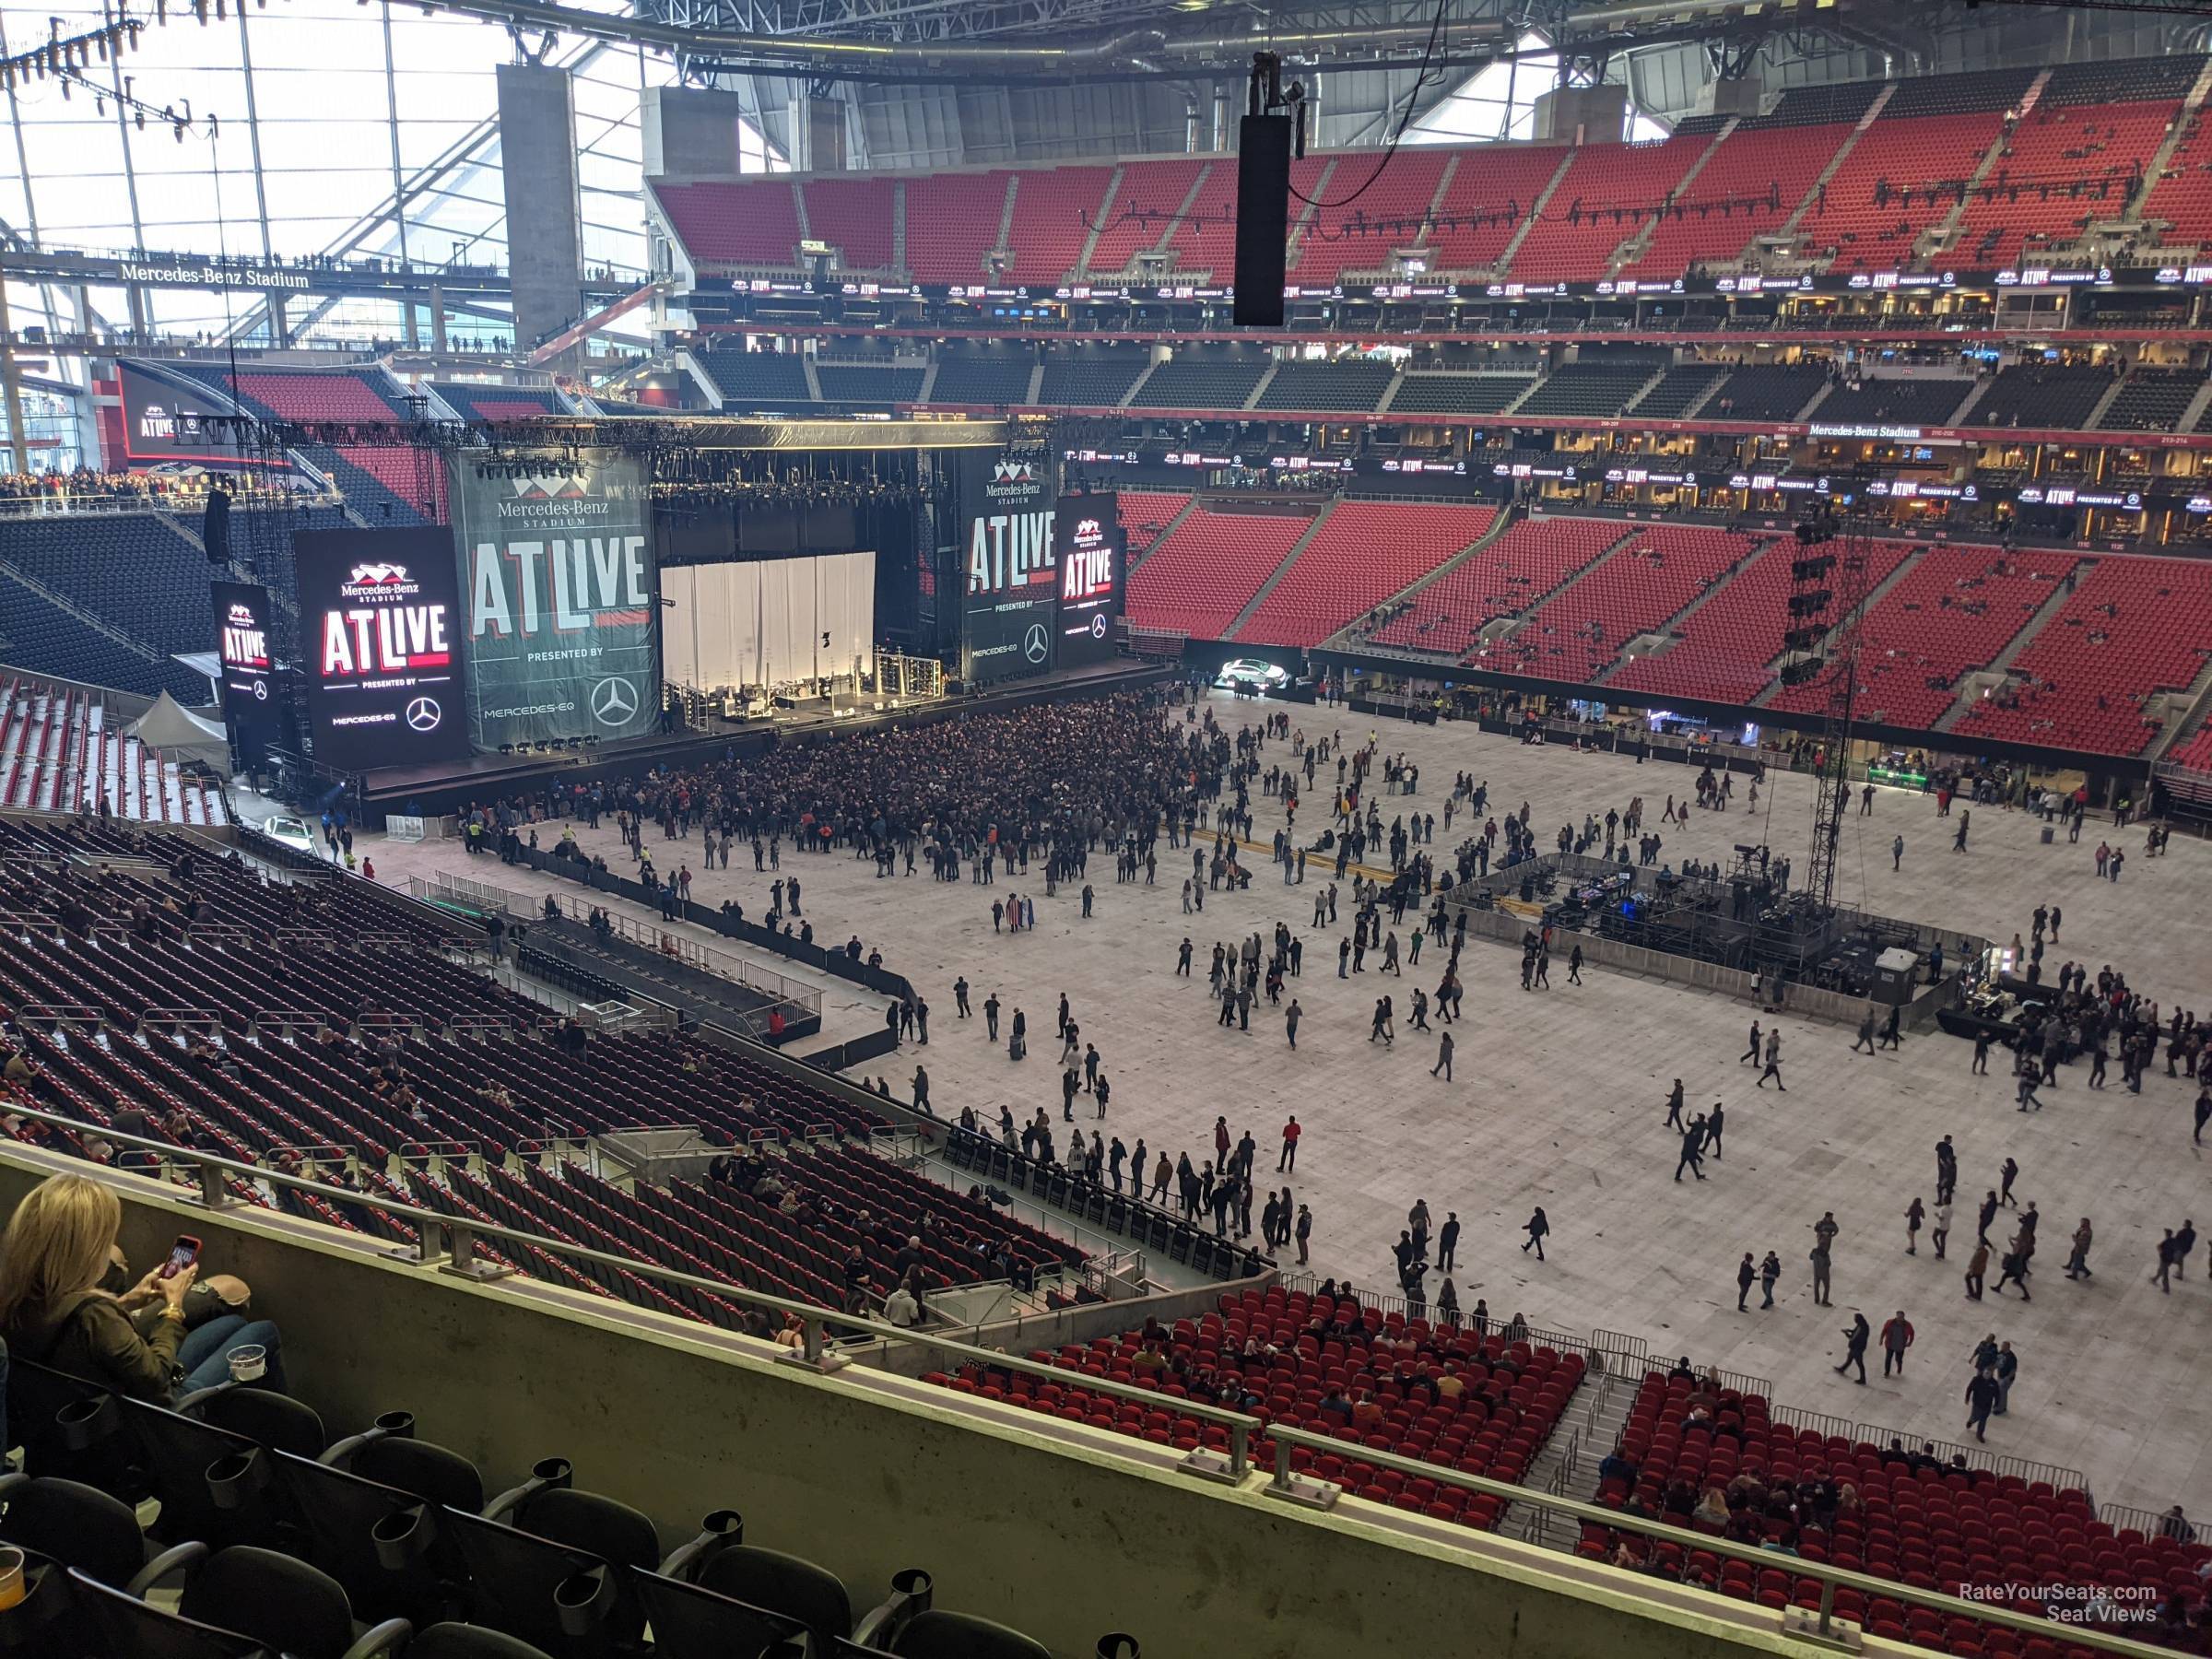 section 232, row 5 seat view  for concert - mercedes-benz stadium